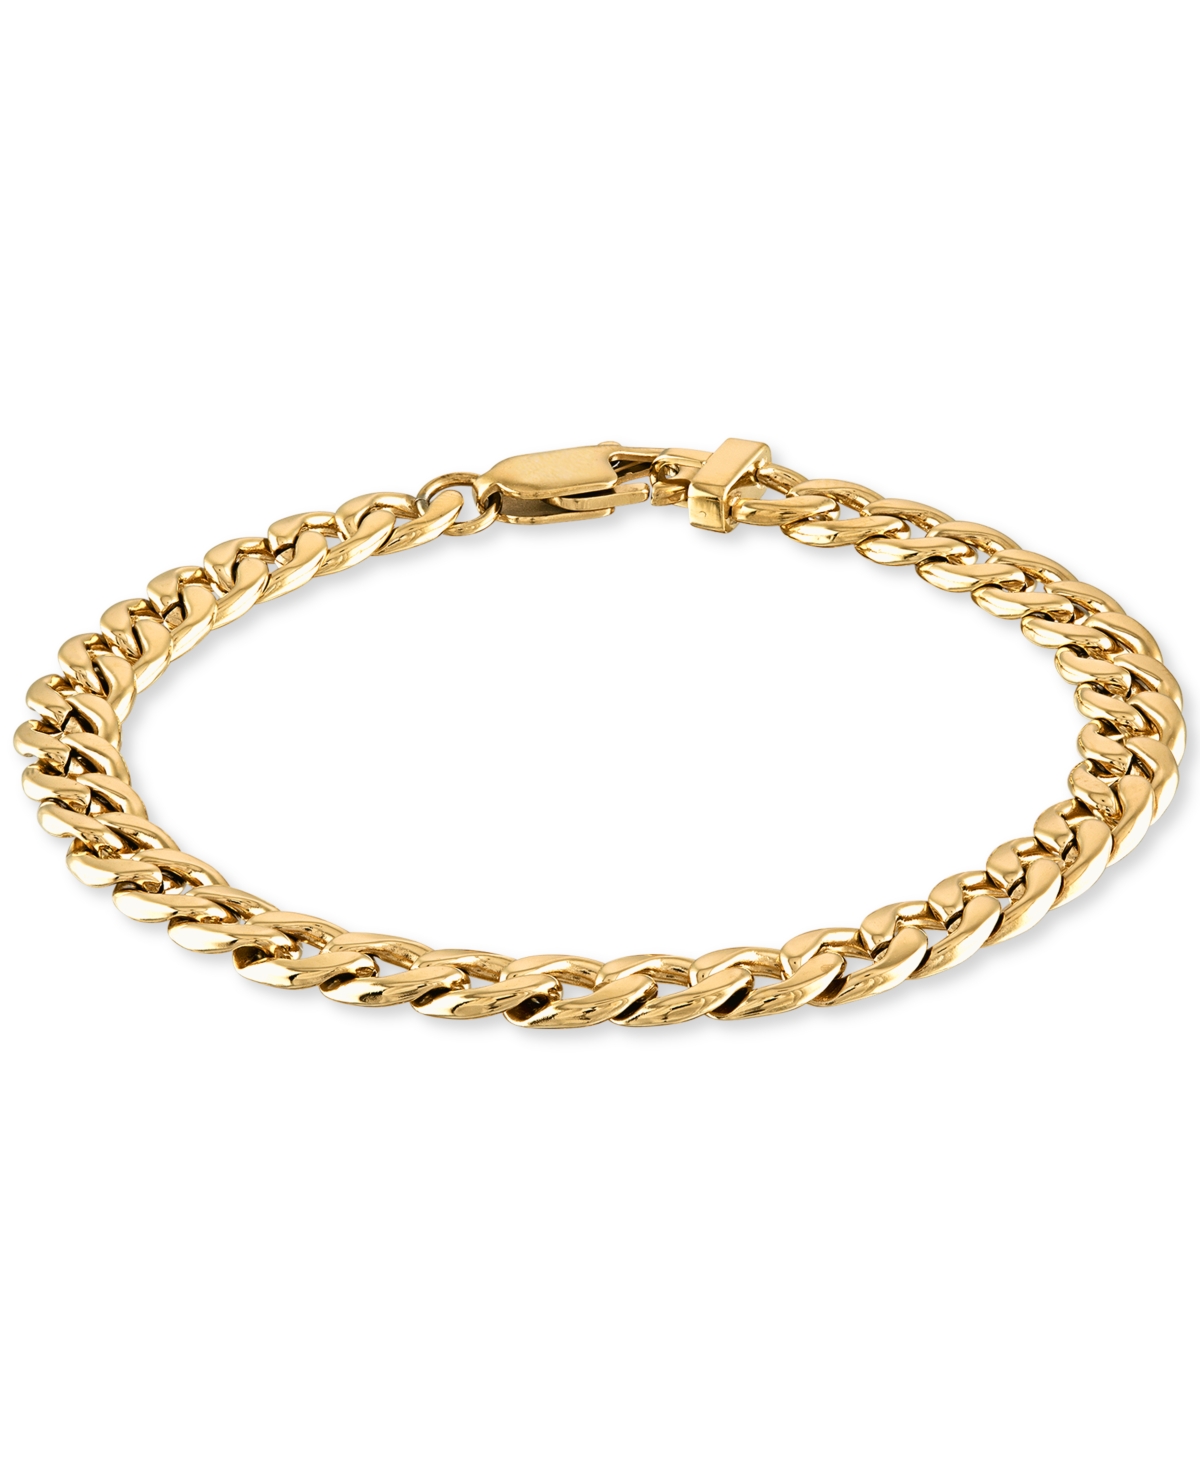 Curb Link Chain Bracelet in Gold-Tone Ion-Plated Stainless Steel, Created for Macy's ( Also available in Stainless Steel) - Gold